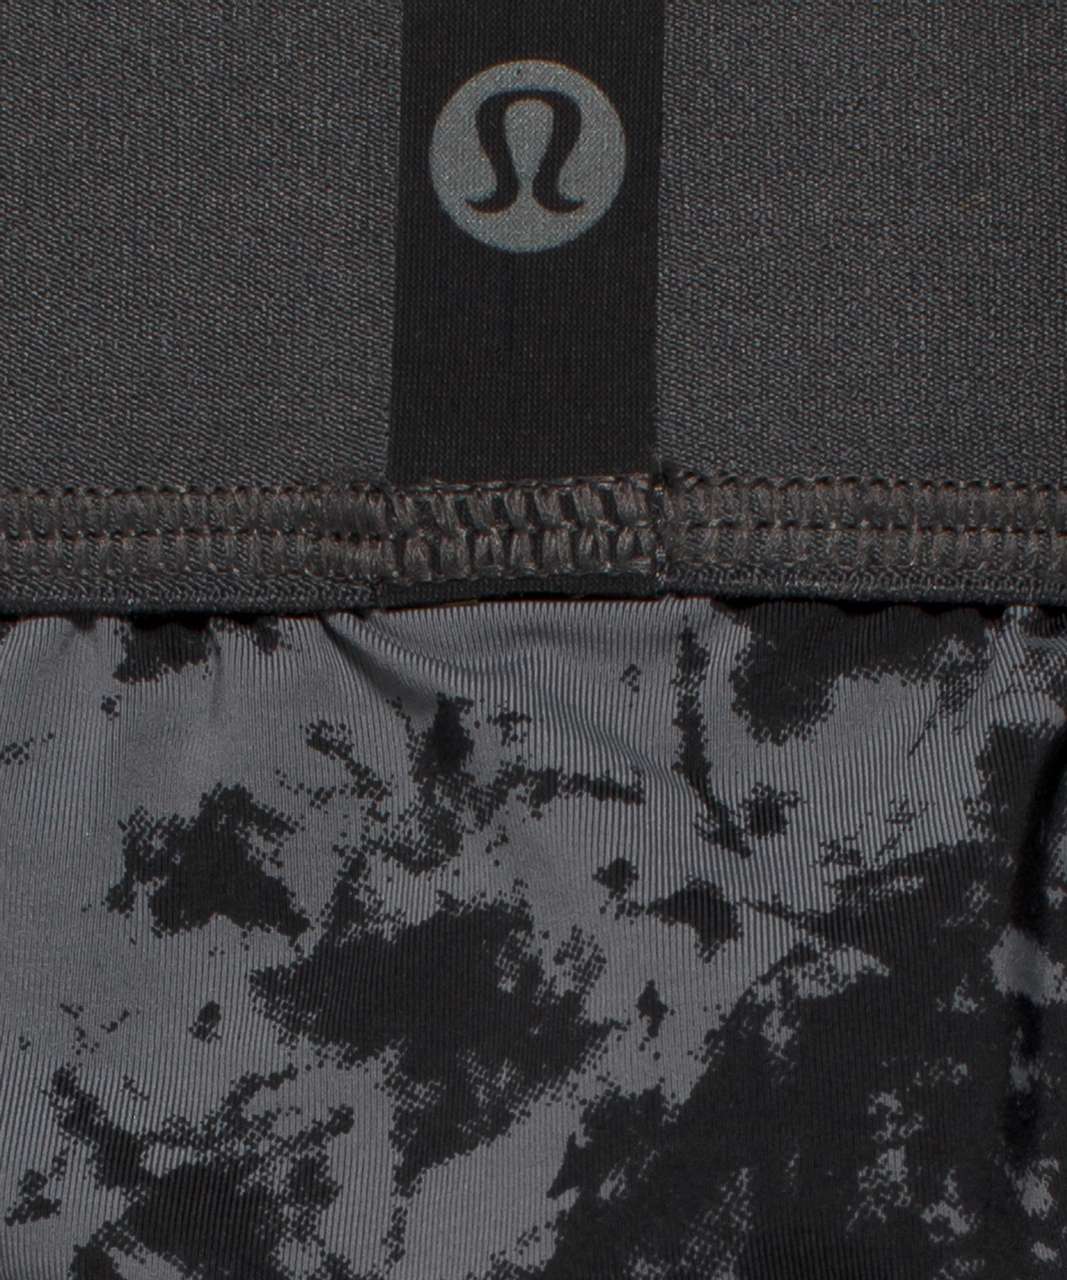 Lululemon Built to Move Long Boxer 7" - Spectral Anchor Black (First Release)